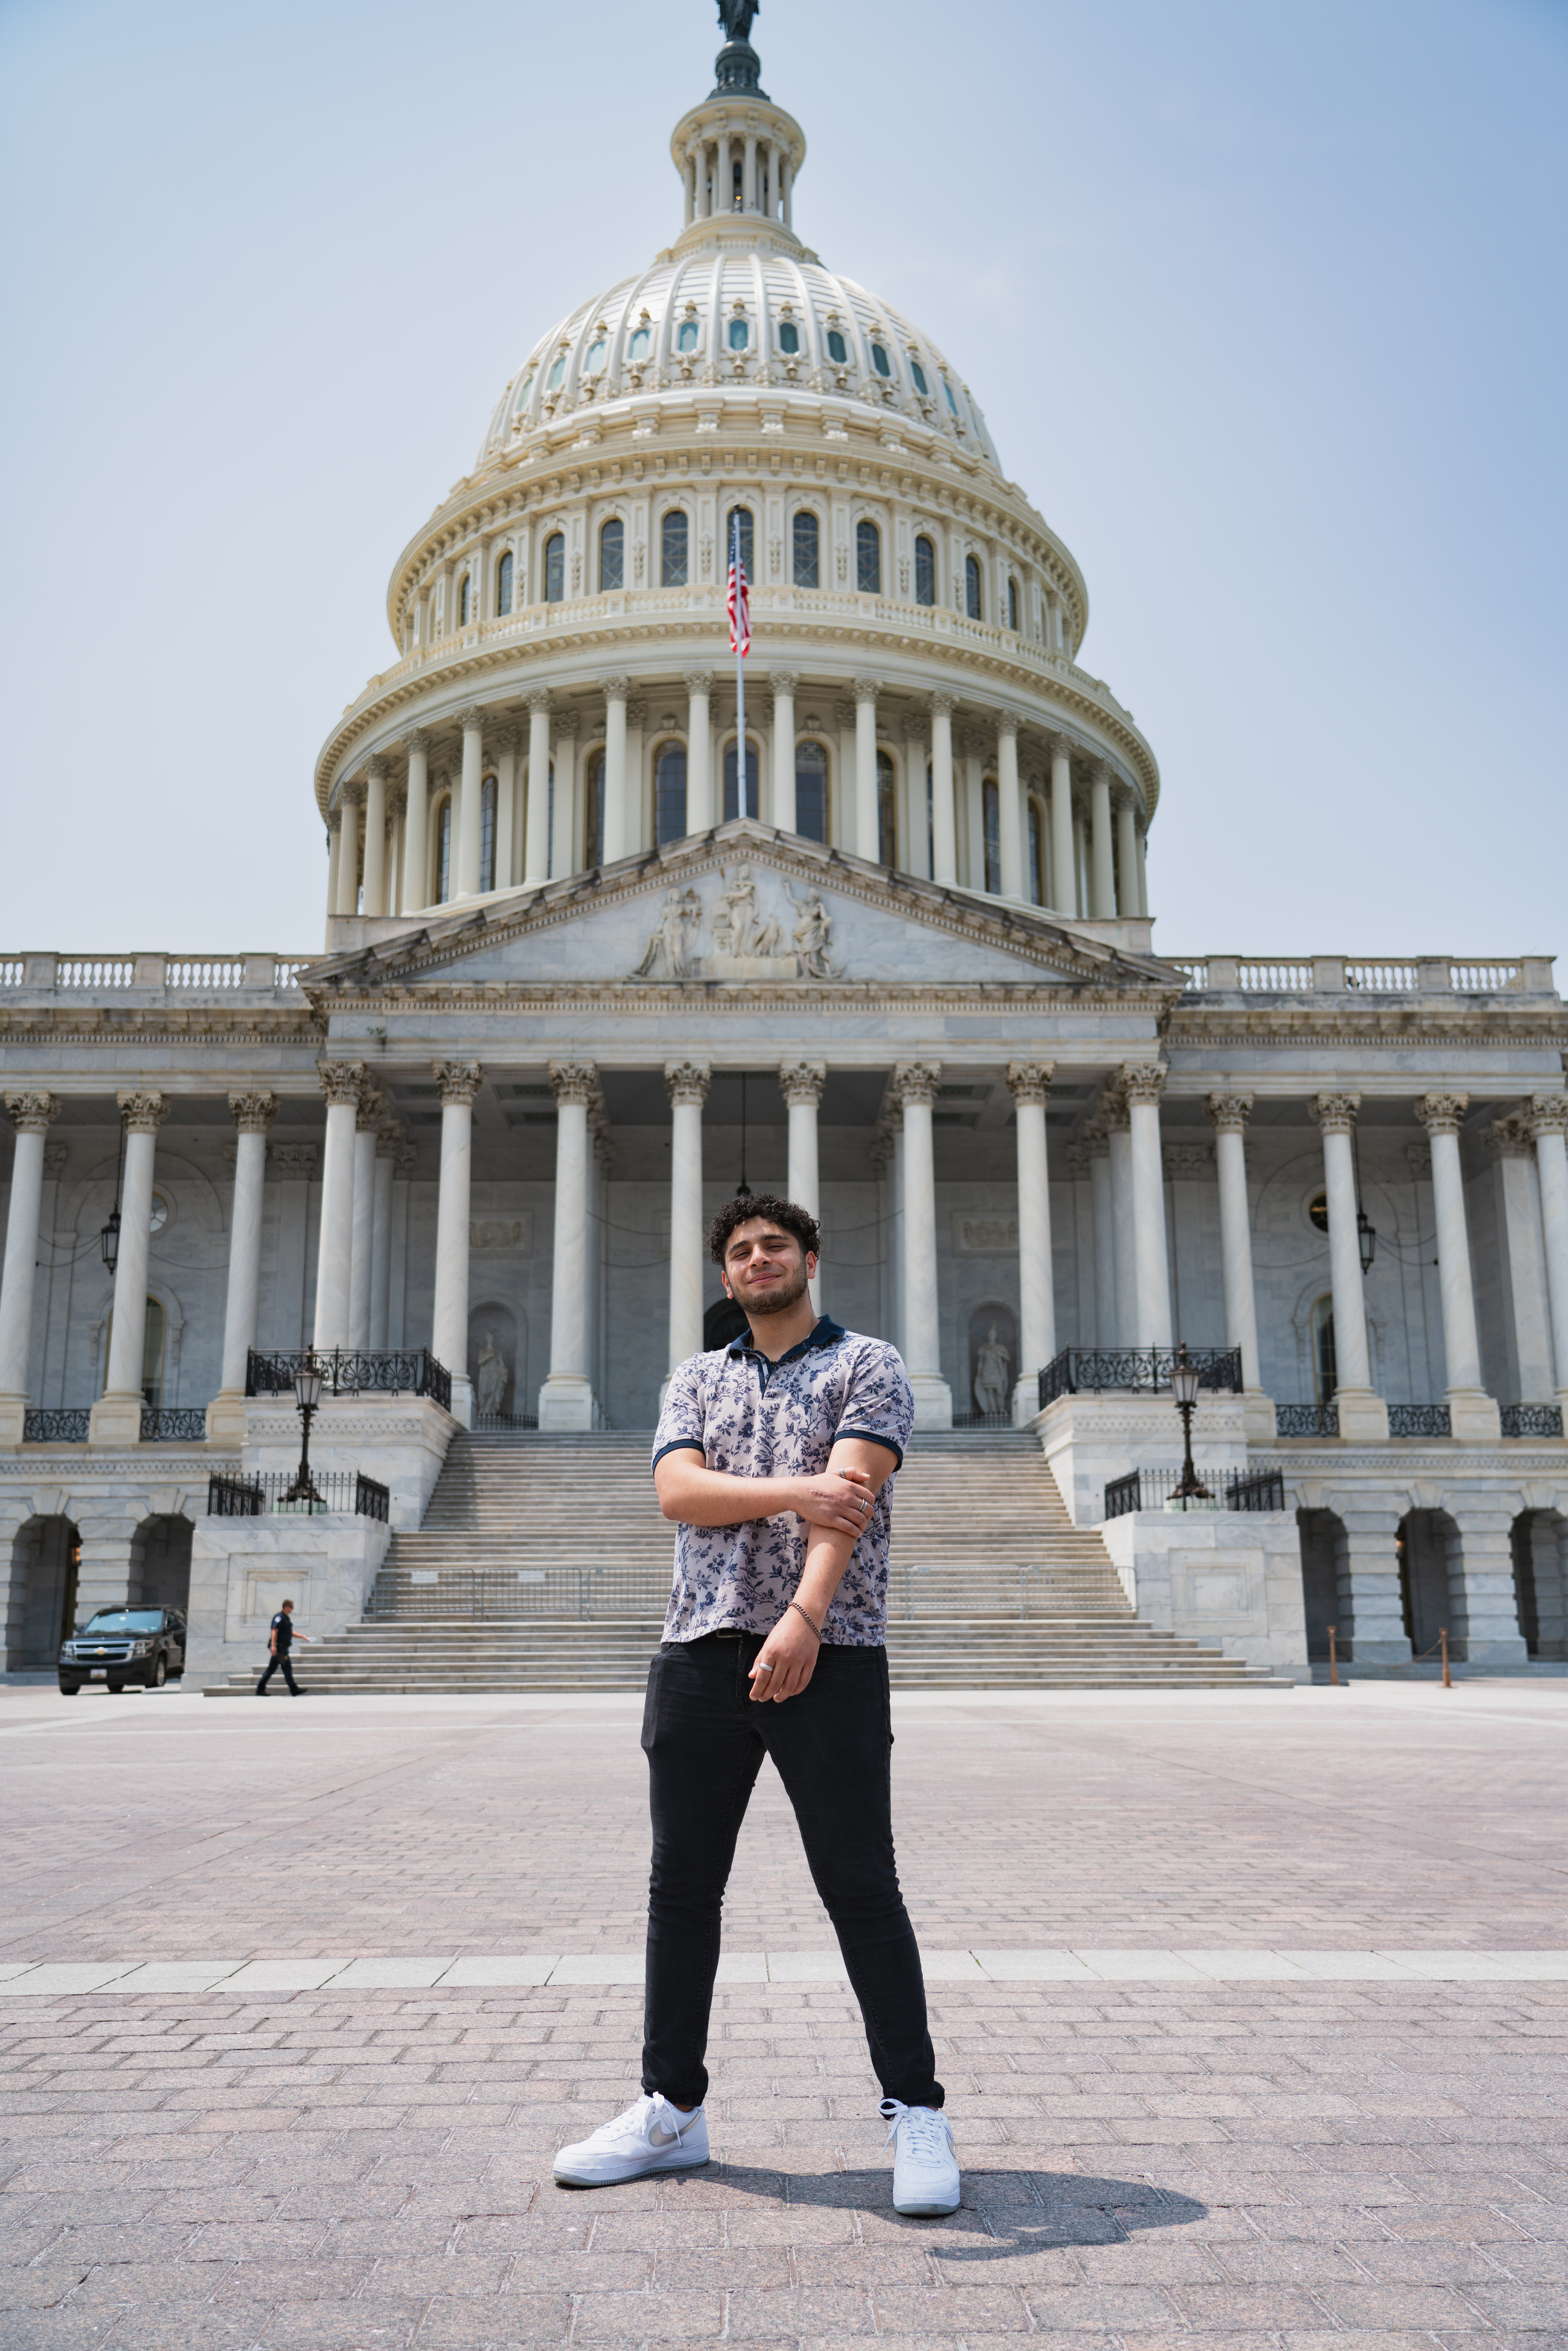 A young adult stands in front of the U.S. capital building